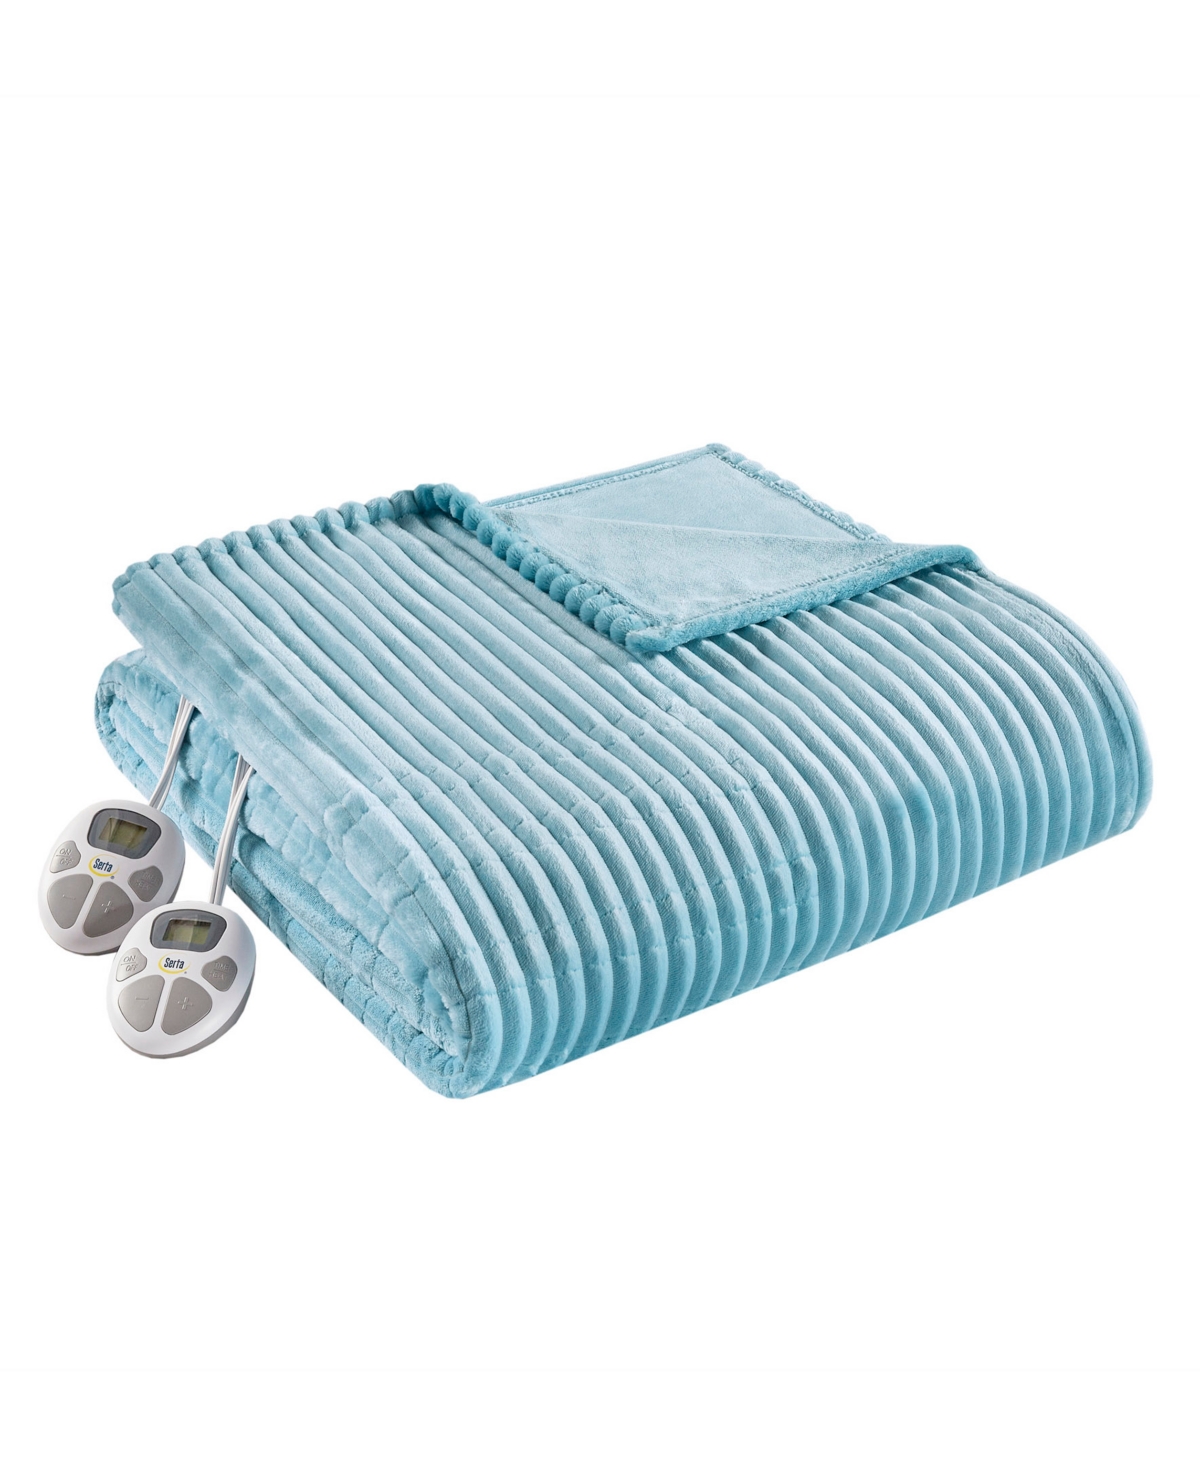 Serta Corded Plush Heated Blanket, Queen In Blue